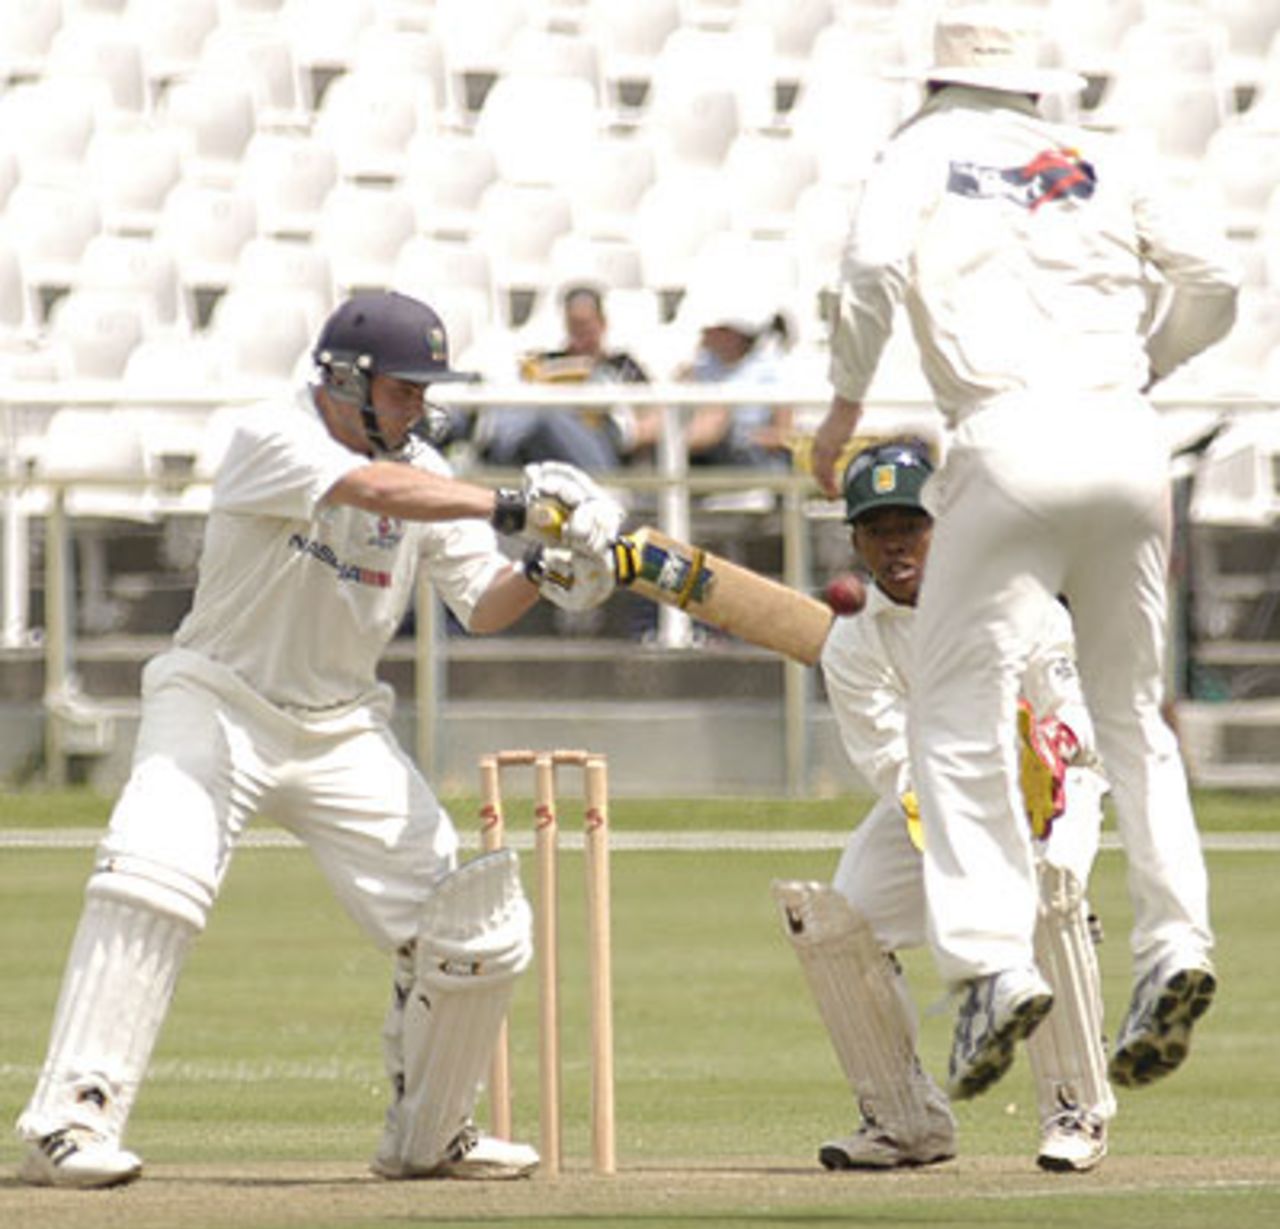 Derrin Bassage cuts a ball against North West at Newlands on Friday